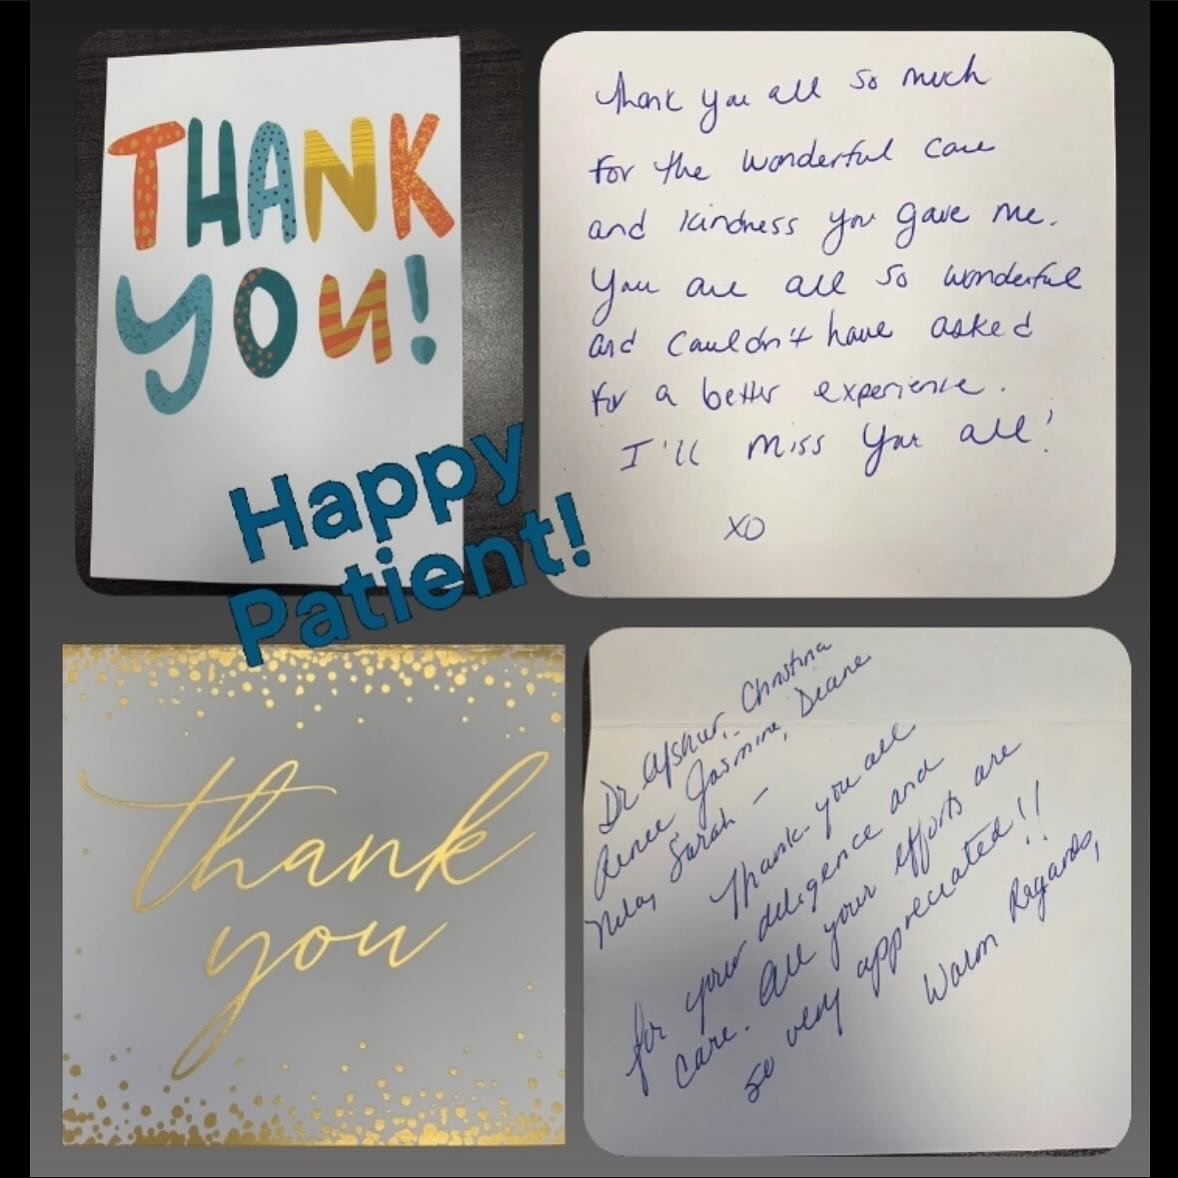 Cards like this make our day! Happy patients, achieving their health goals with dedication and great results - that&rsquo;s what it&rsquo;s all about!🫶🩺

Ready to take control of your vein health?

➡️ Learn more: veininstitute.com
➡️ Call us: (203)